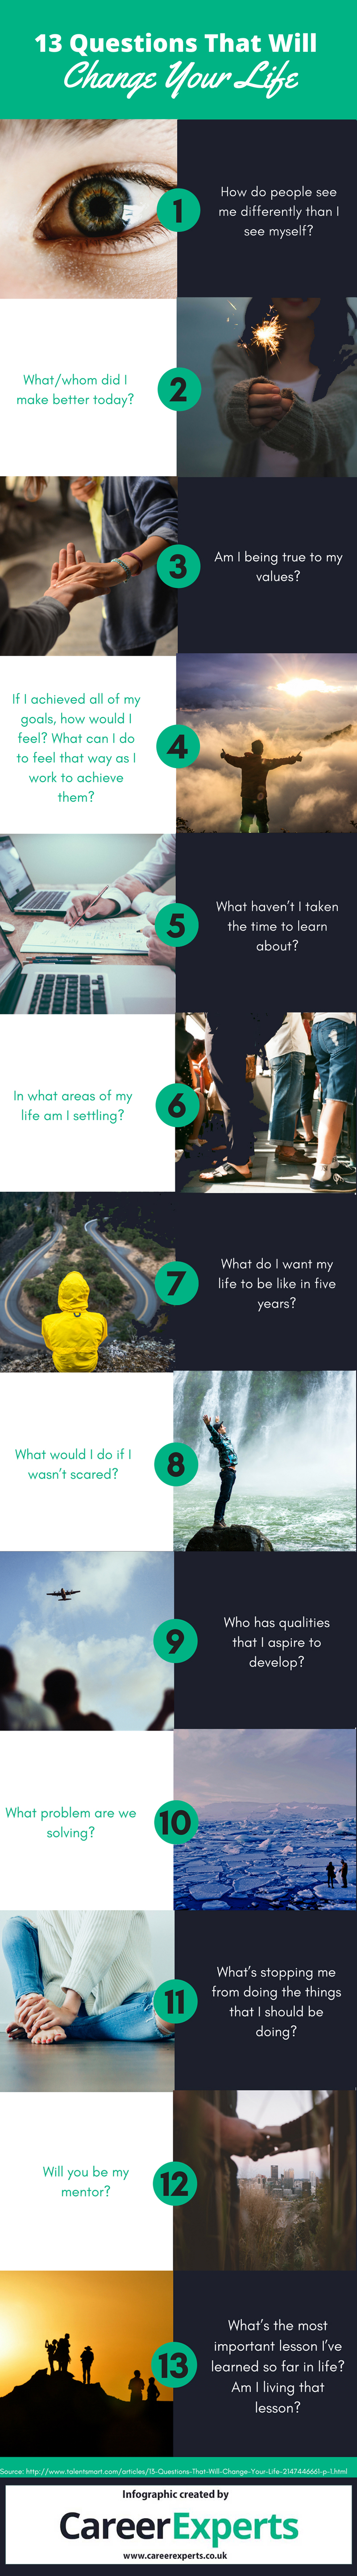 13 questions that will change your life